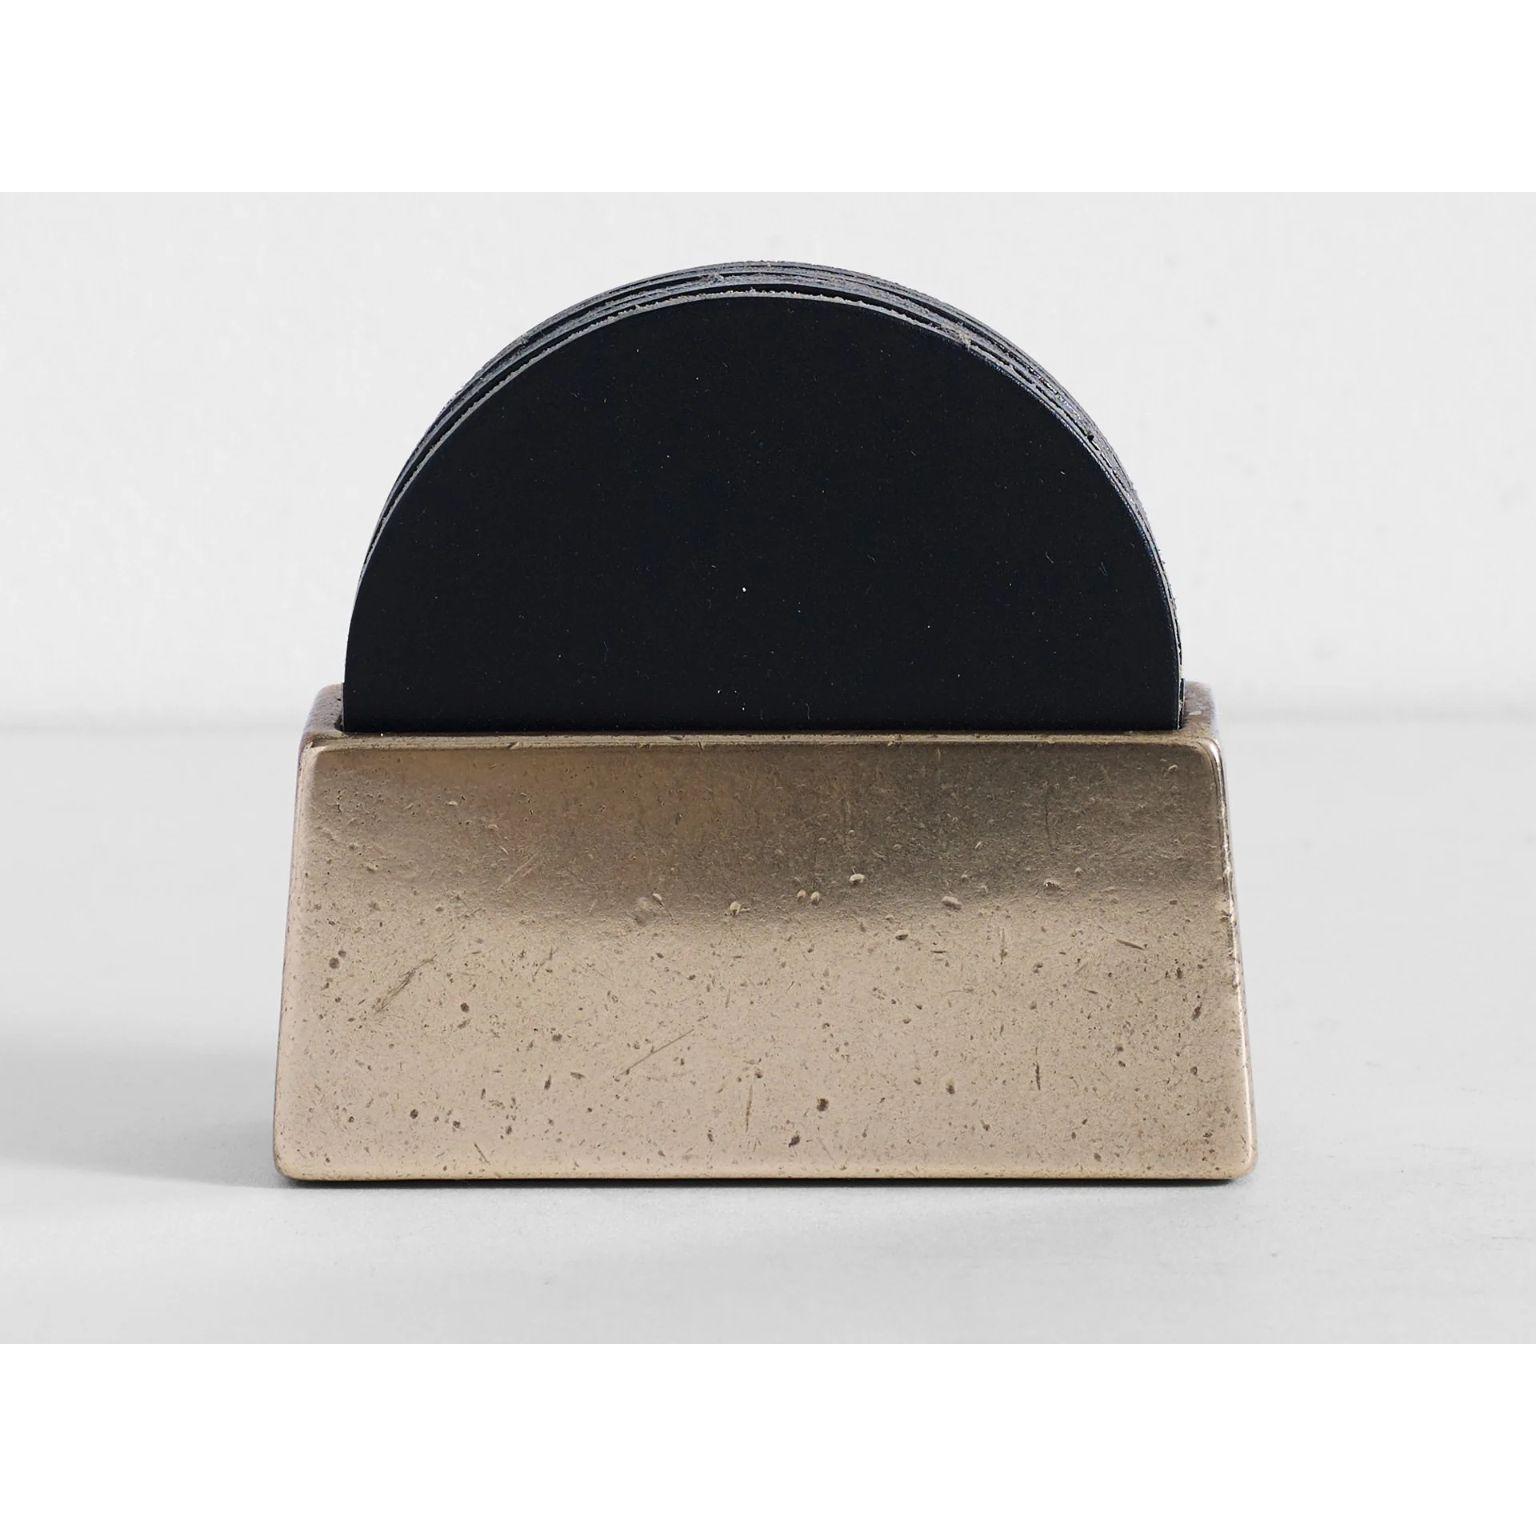 Brass Coaster Holder With Black Coaster Set by Henry Wilson
Dimensions:  W 11 x D 4 x H 5 cm (Coaster Holder dimensions)
Materials: Solid brass, Leather

Sand cast in solid brass and hand finished.
Holds 6 Tan leather coasters that are included with